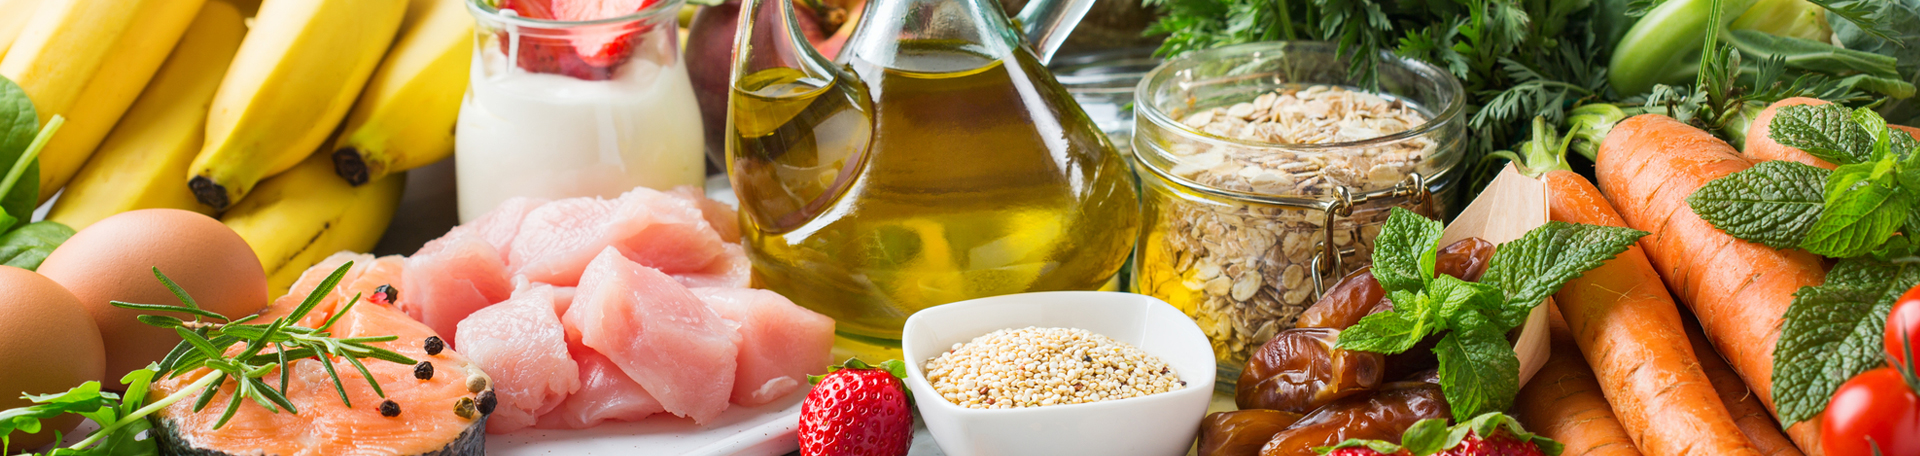 Baton Rouge mediterranean diet good for body and mind, part of Baton Rouge chiropractic treatment plan for some